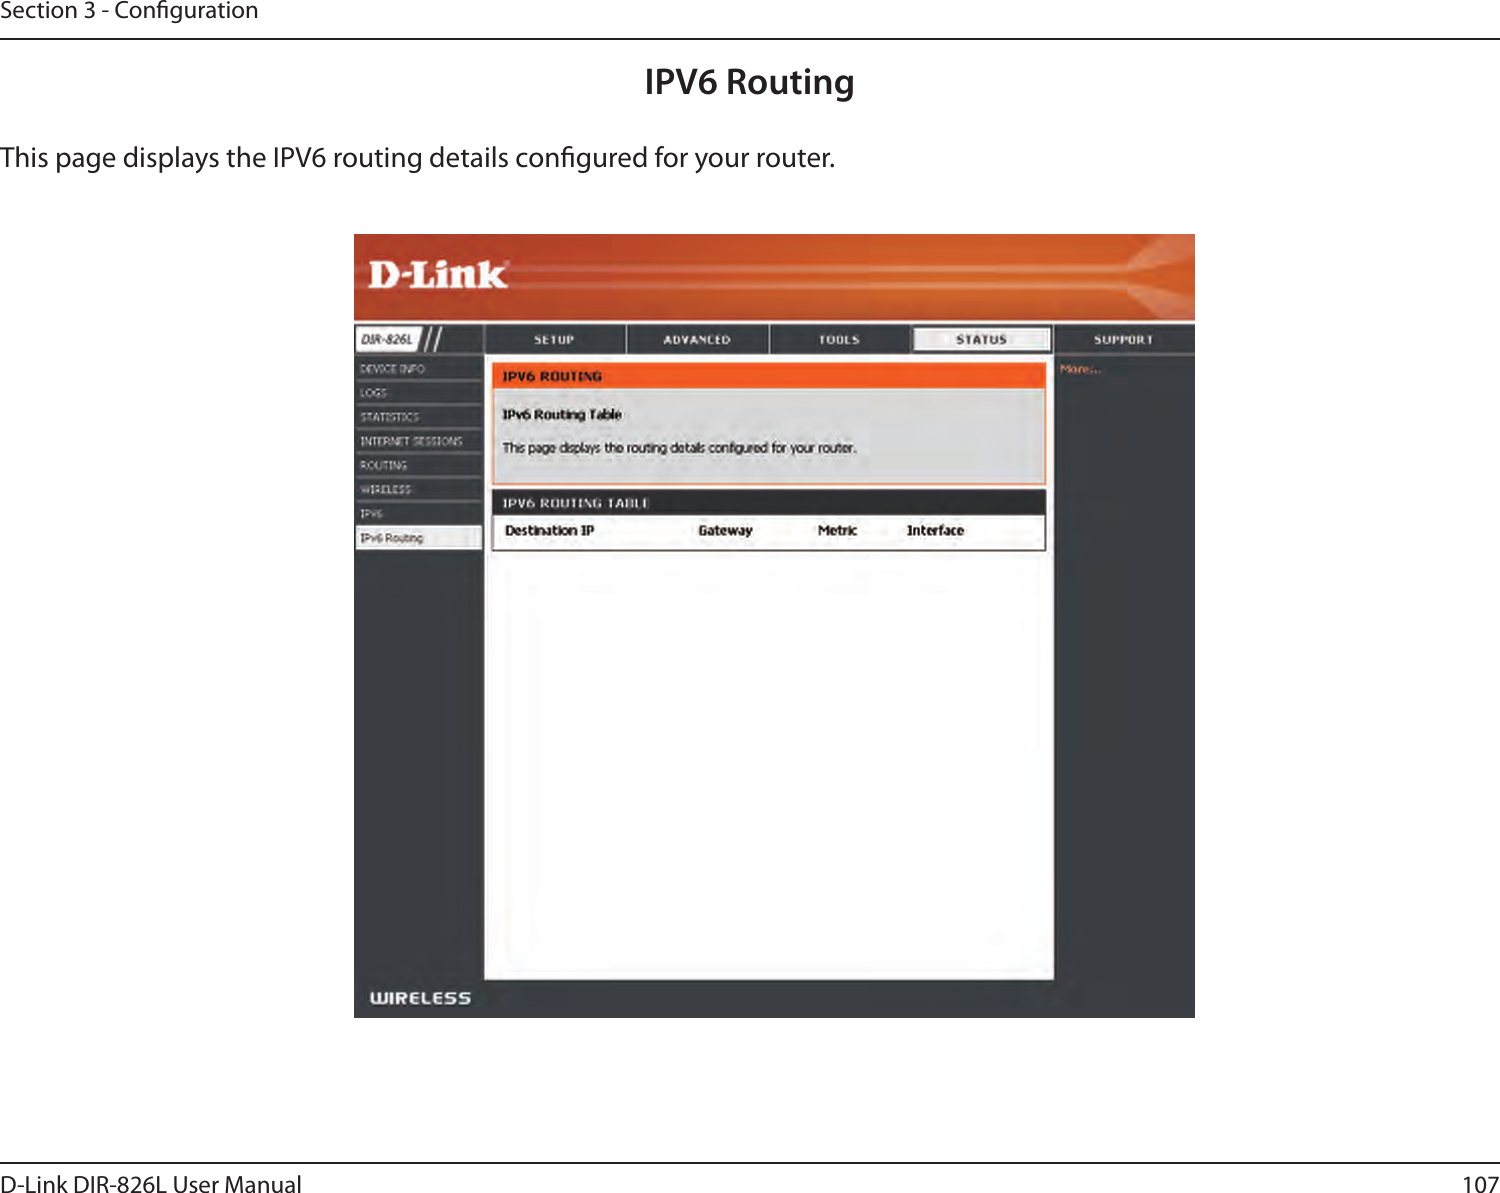 107D-Link DIR-826L User ManualSection 3 - CongurationIPV6 RoutingThis page displays the IPV6 routing details congured for your router. 